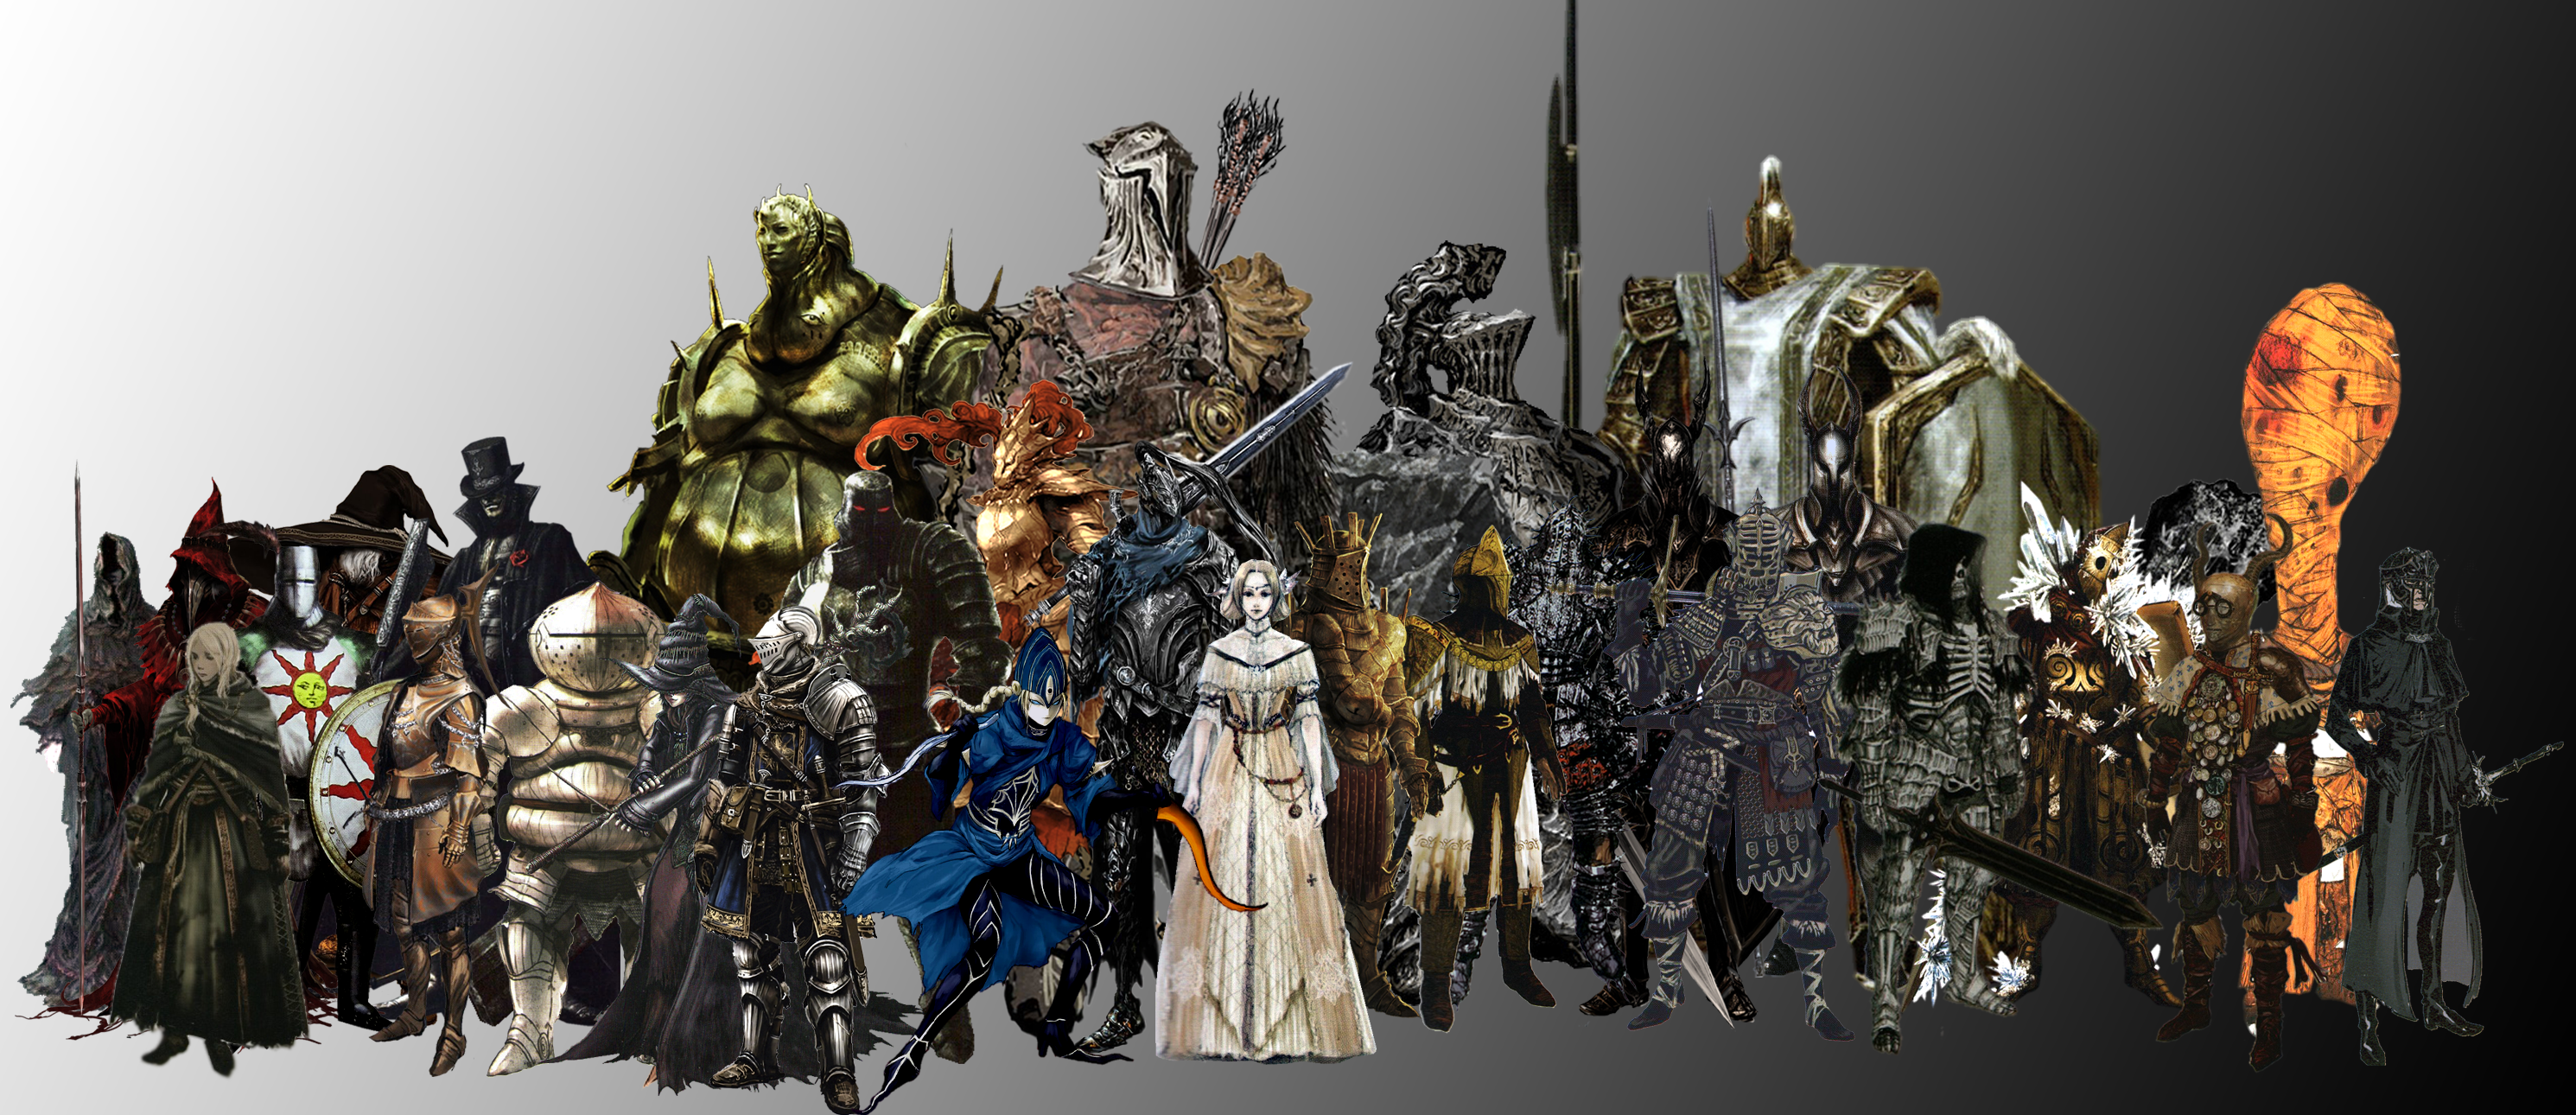 dark_souls_main_characters_by_giovannimicarelli-d5rwrq4.png